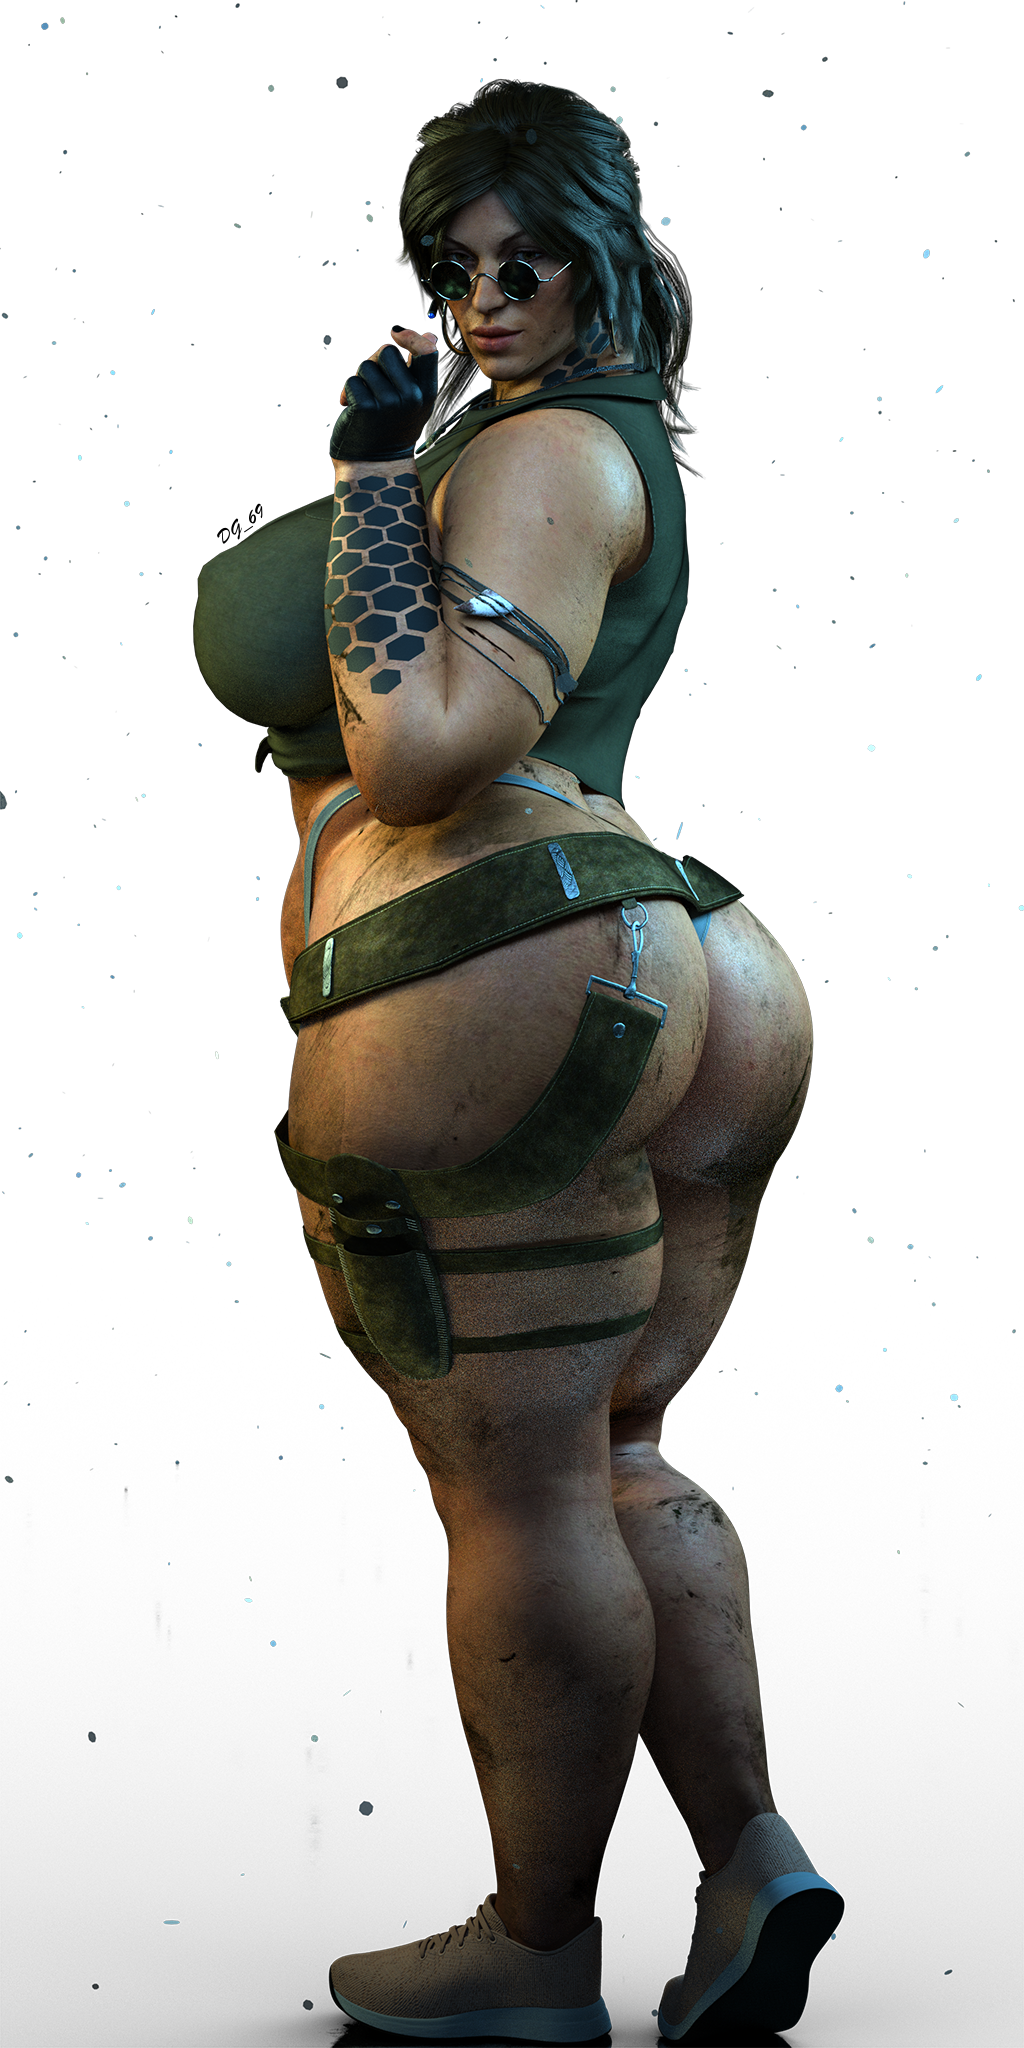 tomb-raider-rule-porn-–-curvy-female,-female-only,-fat-ass,-bbw,-child-bearing-hips